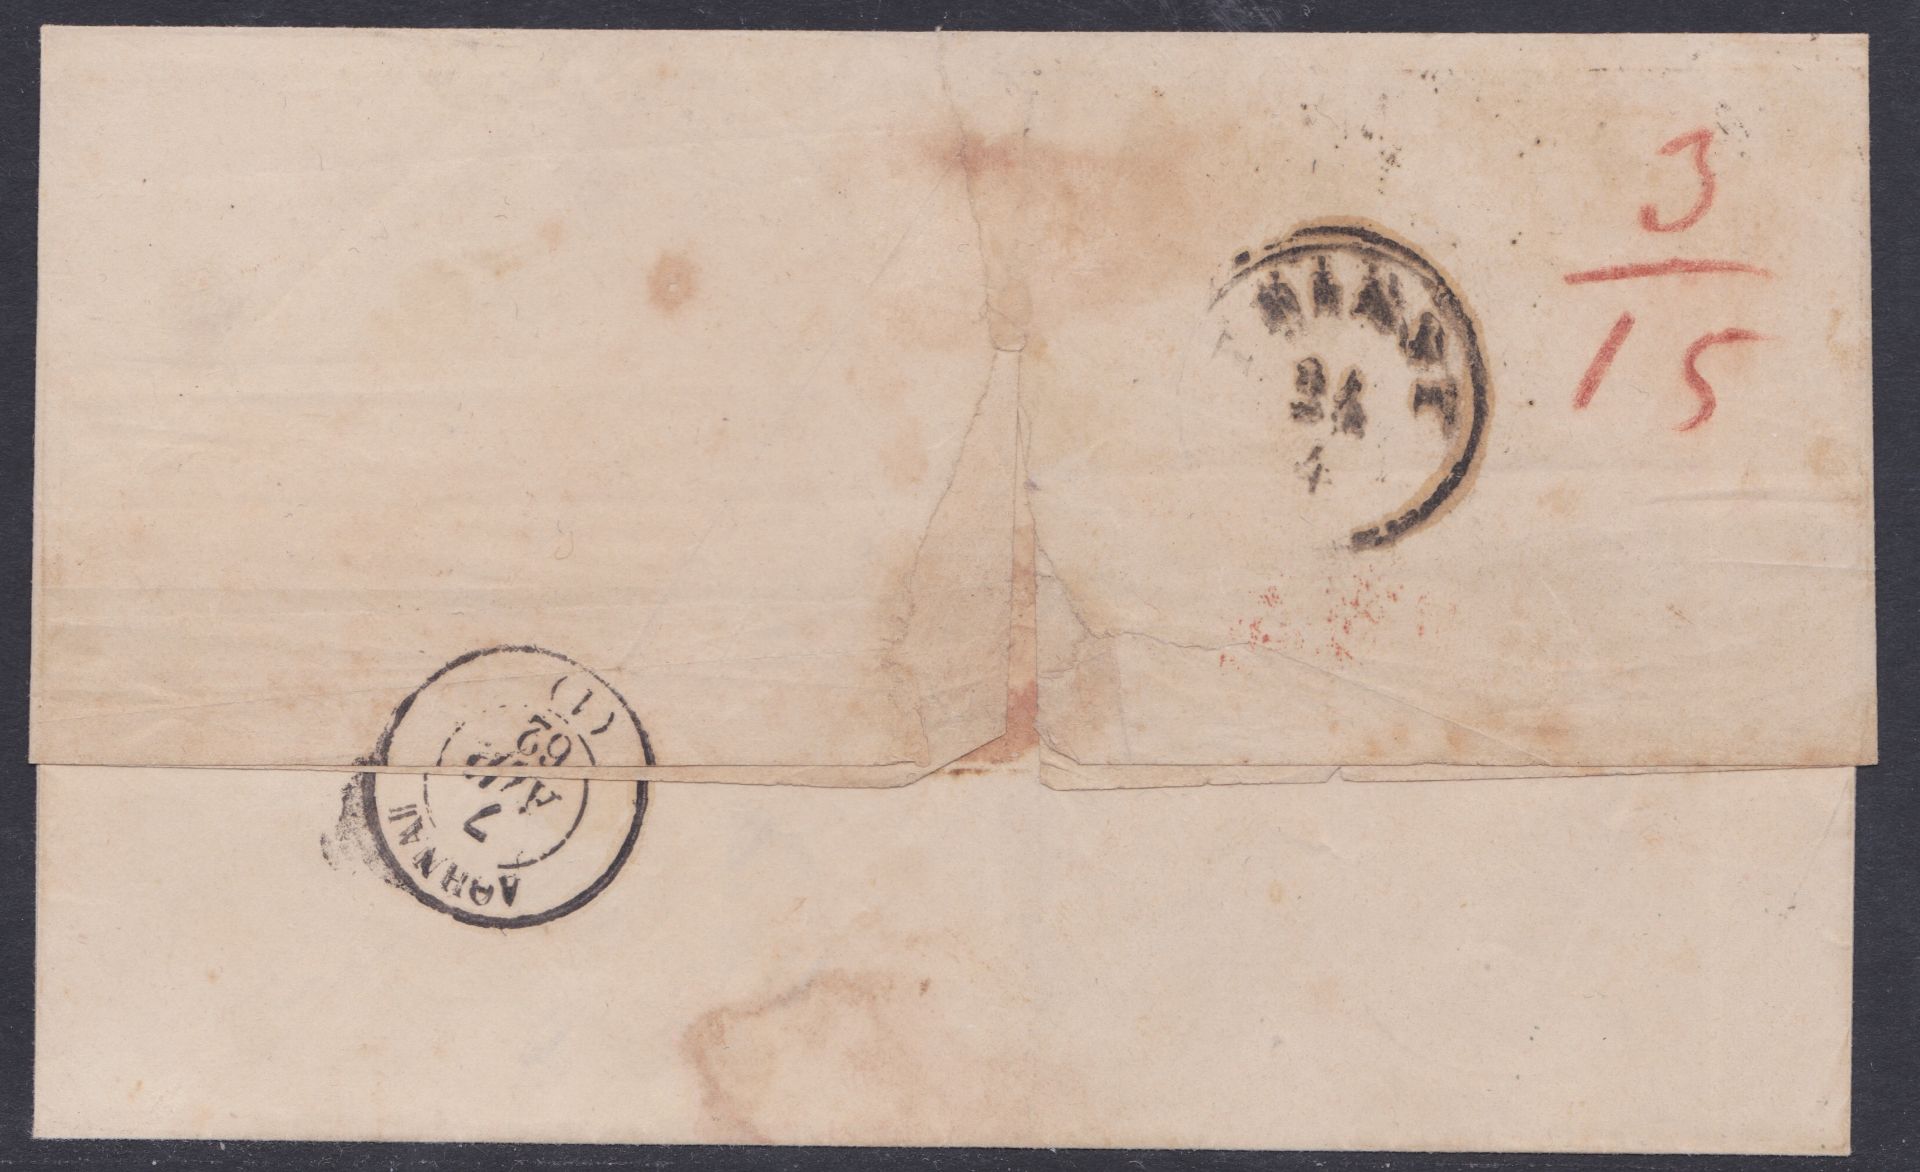 GREECE 1862 - Entire (some staining) from Patras to Trieste bearing 1861 Paris Printing 5L, 20L, - Image 2 of 2